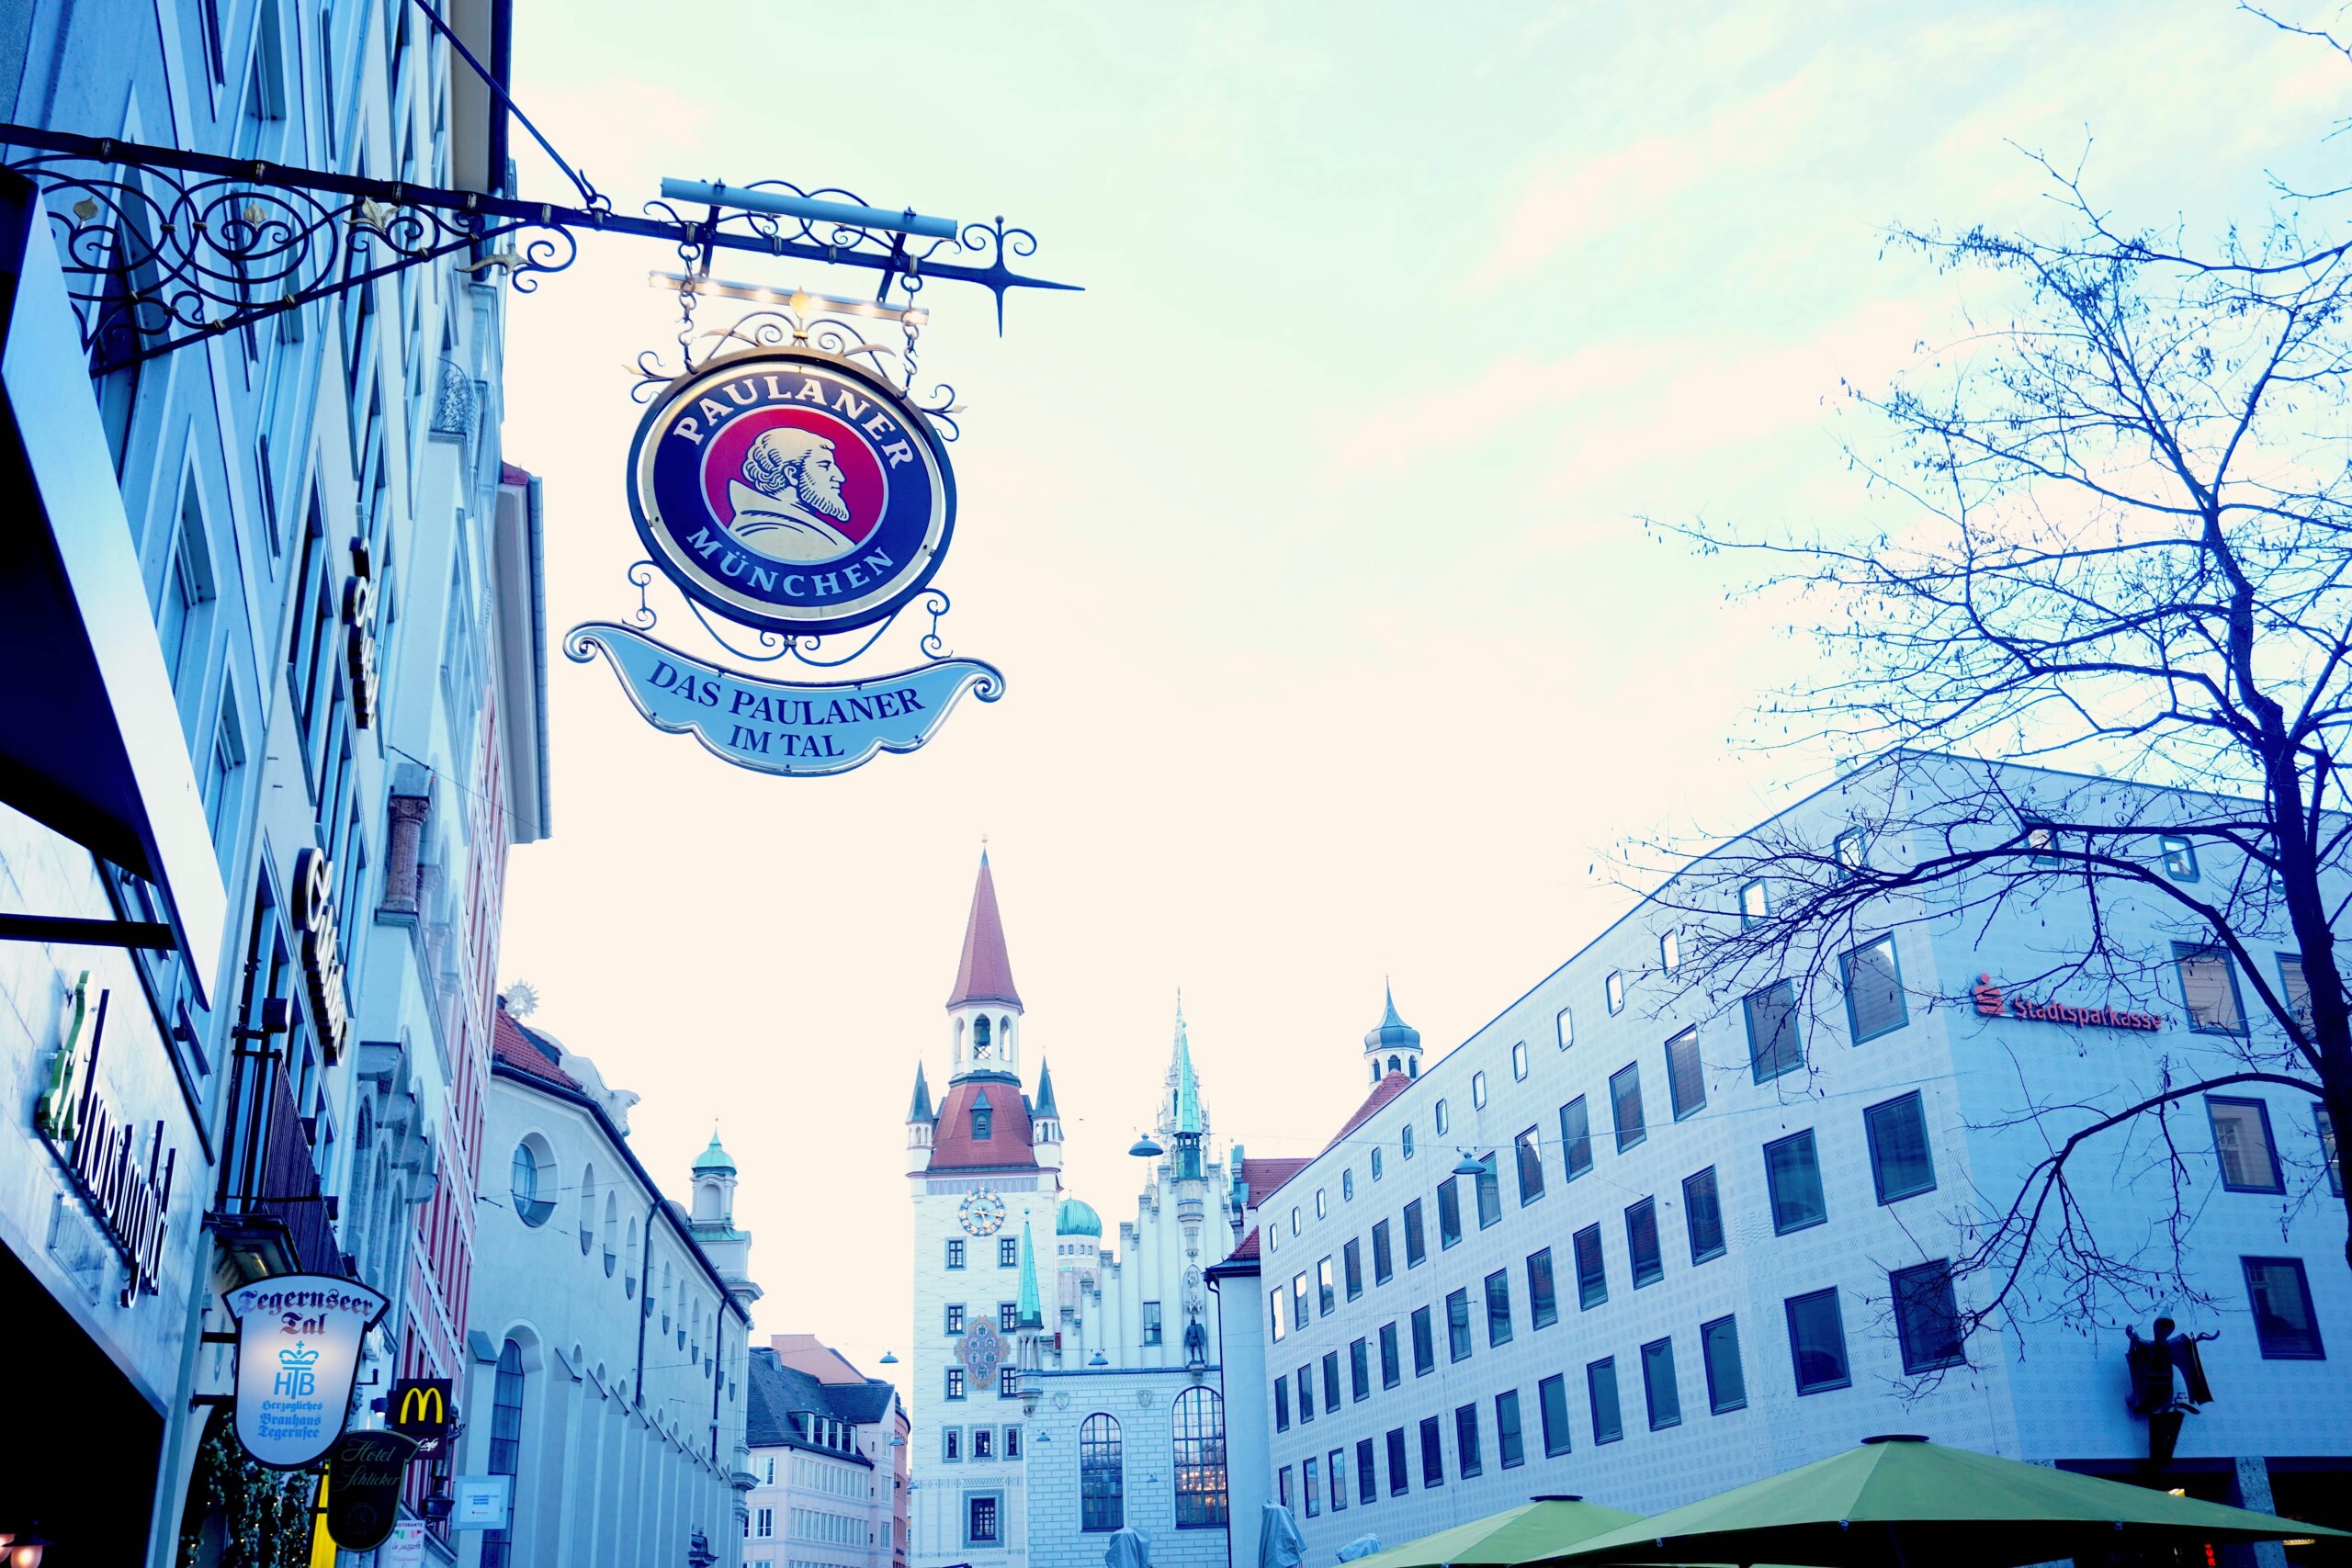 The Paulaner sign in Munich